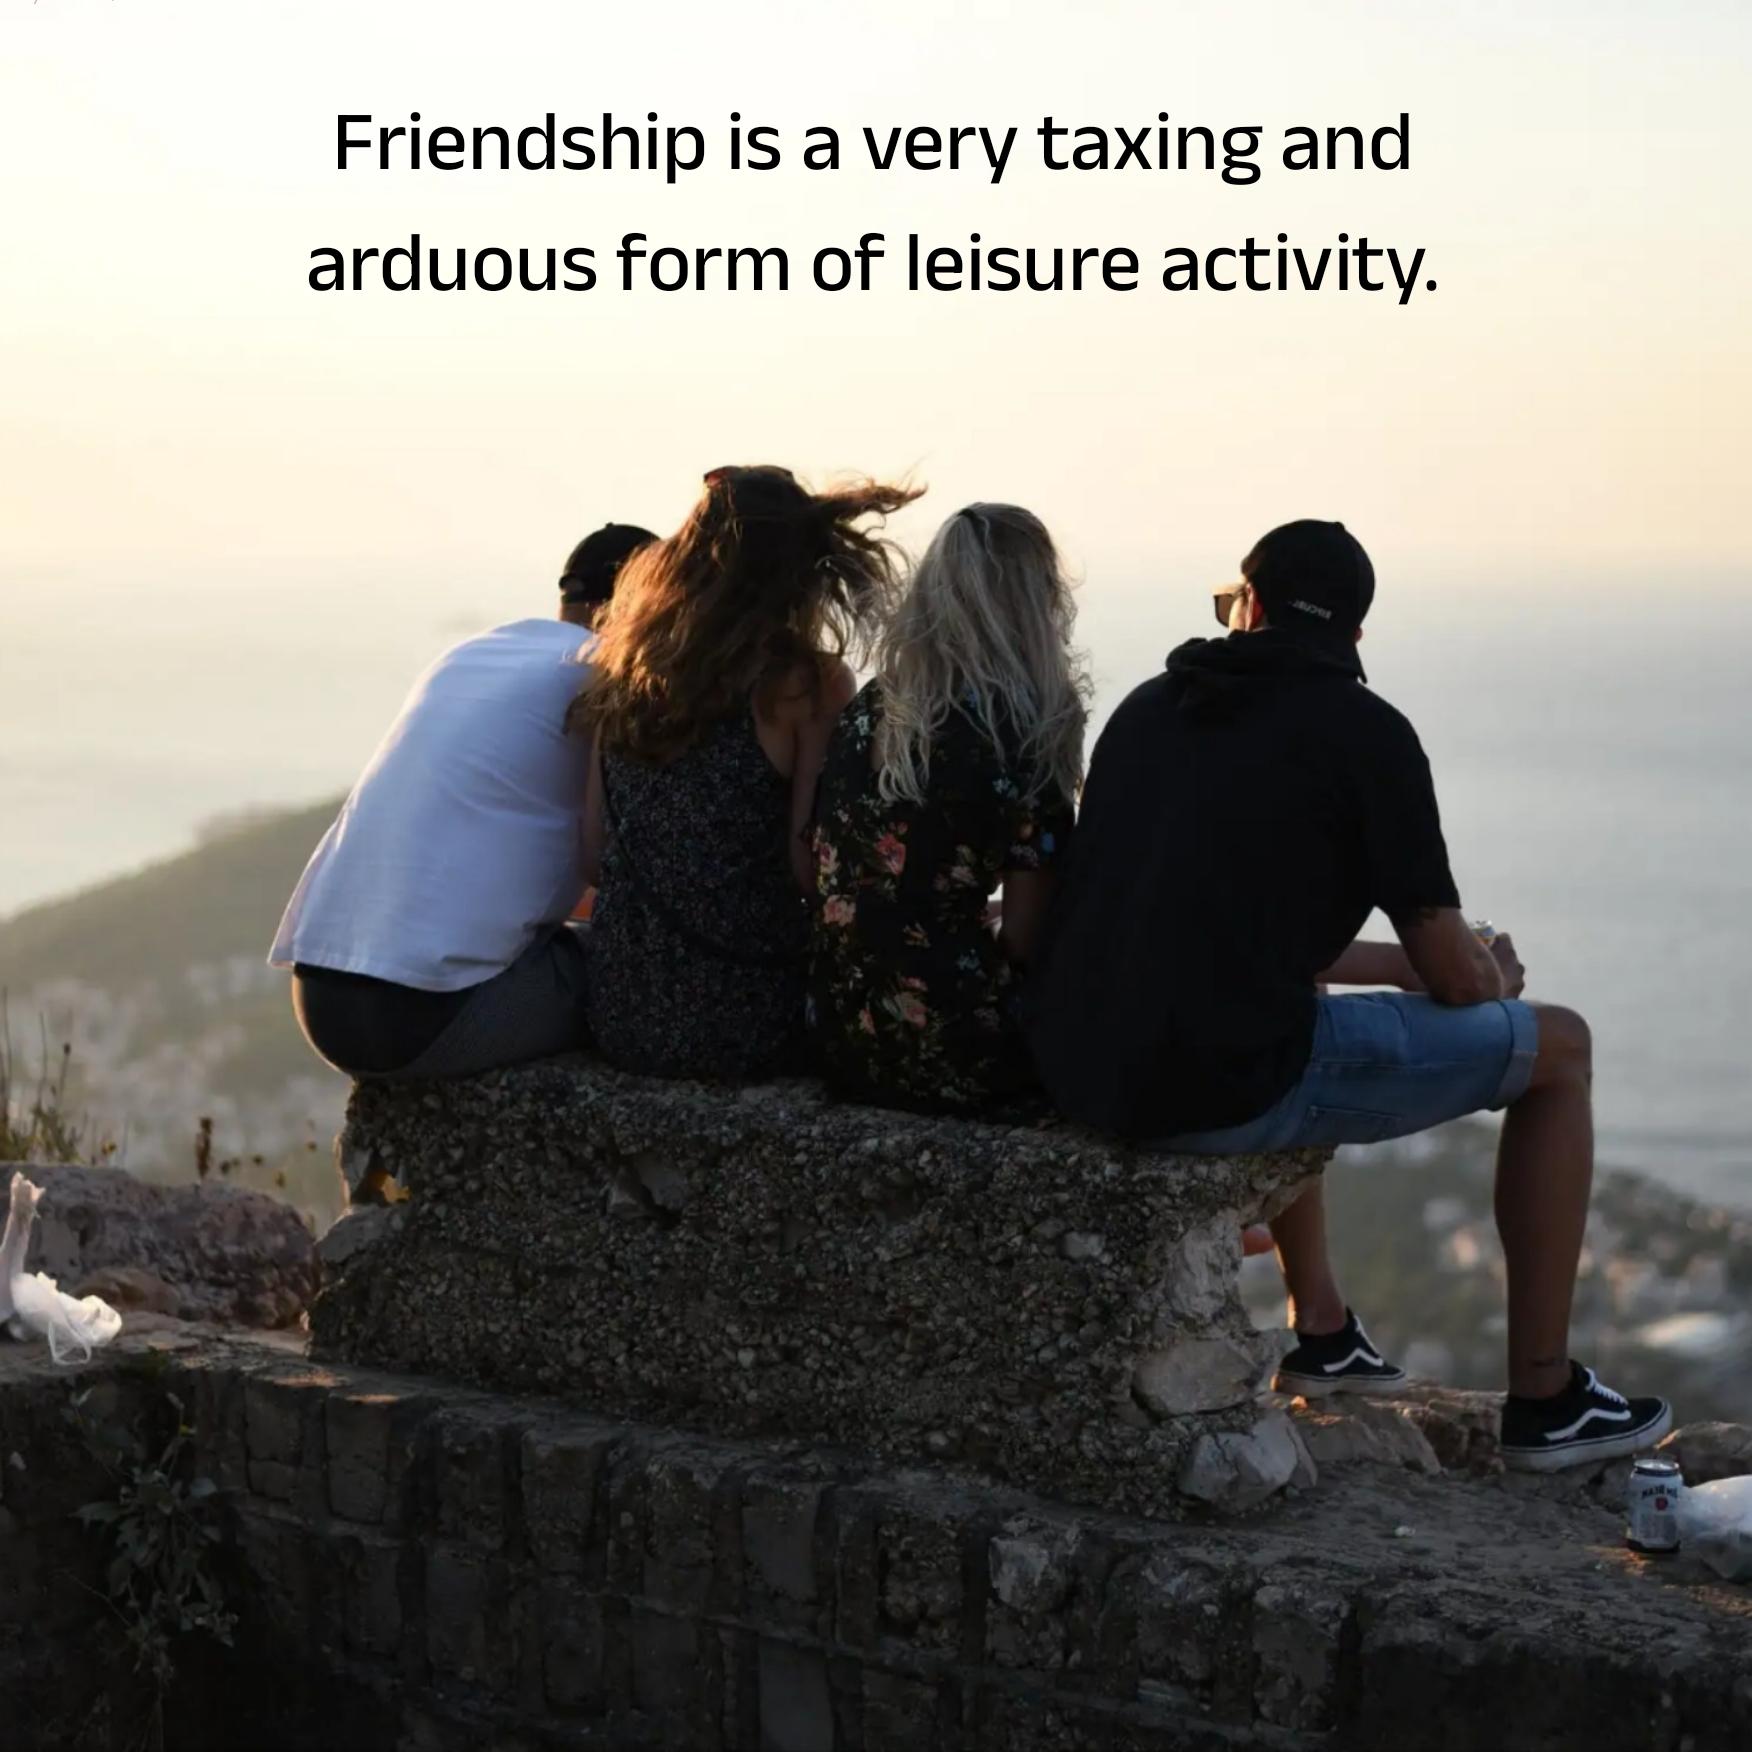 Friendship is a very taxing and arduous form of leisure activity